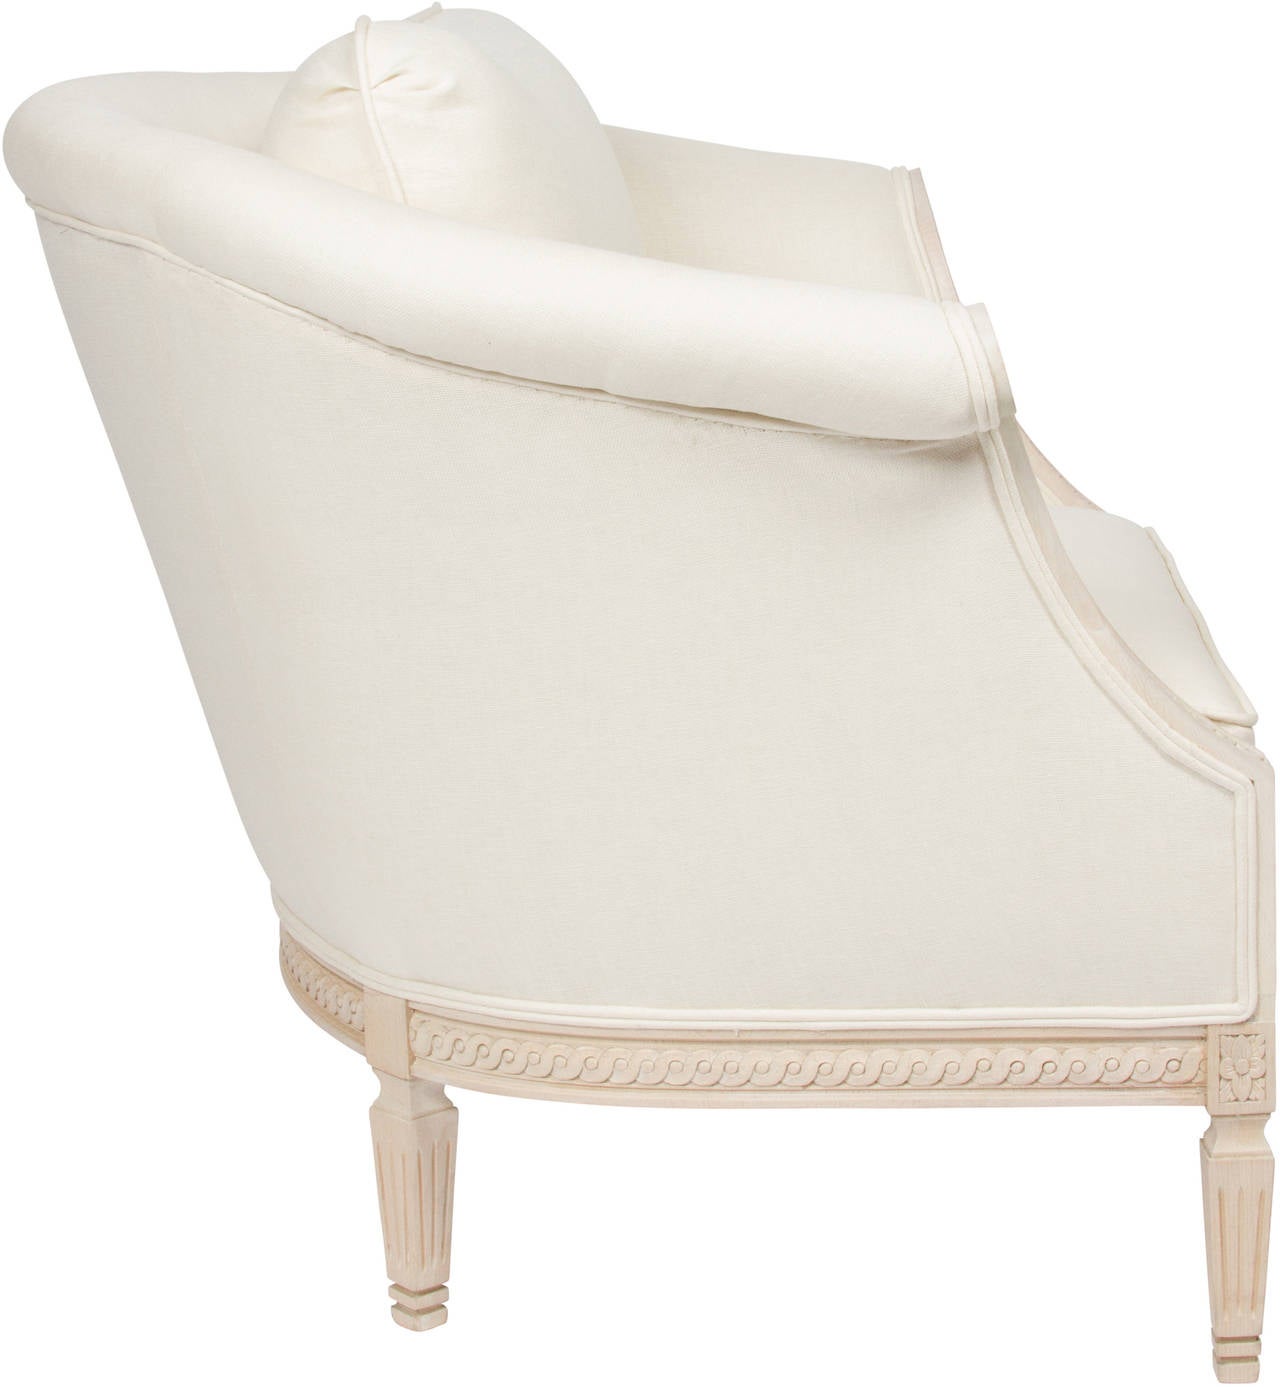 Chic pair of Regency style bergère chairs with bleached maple frames, in linen.